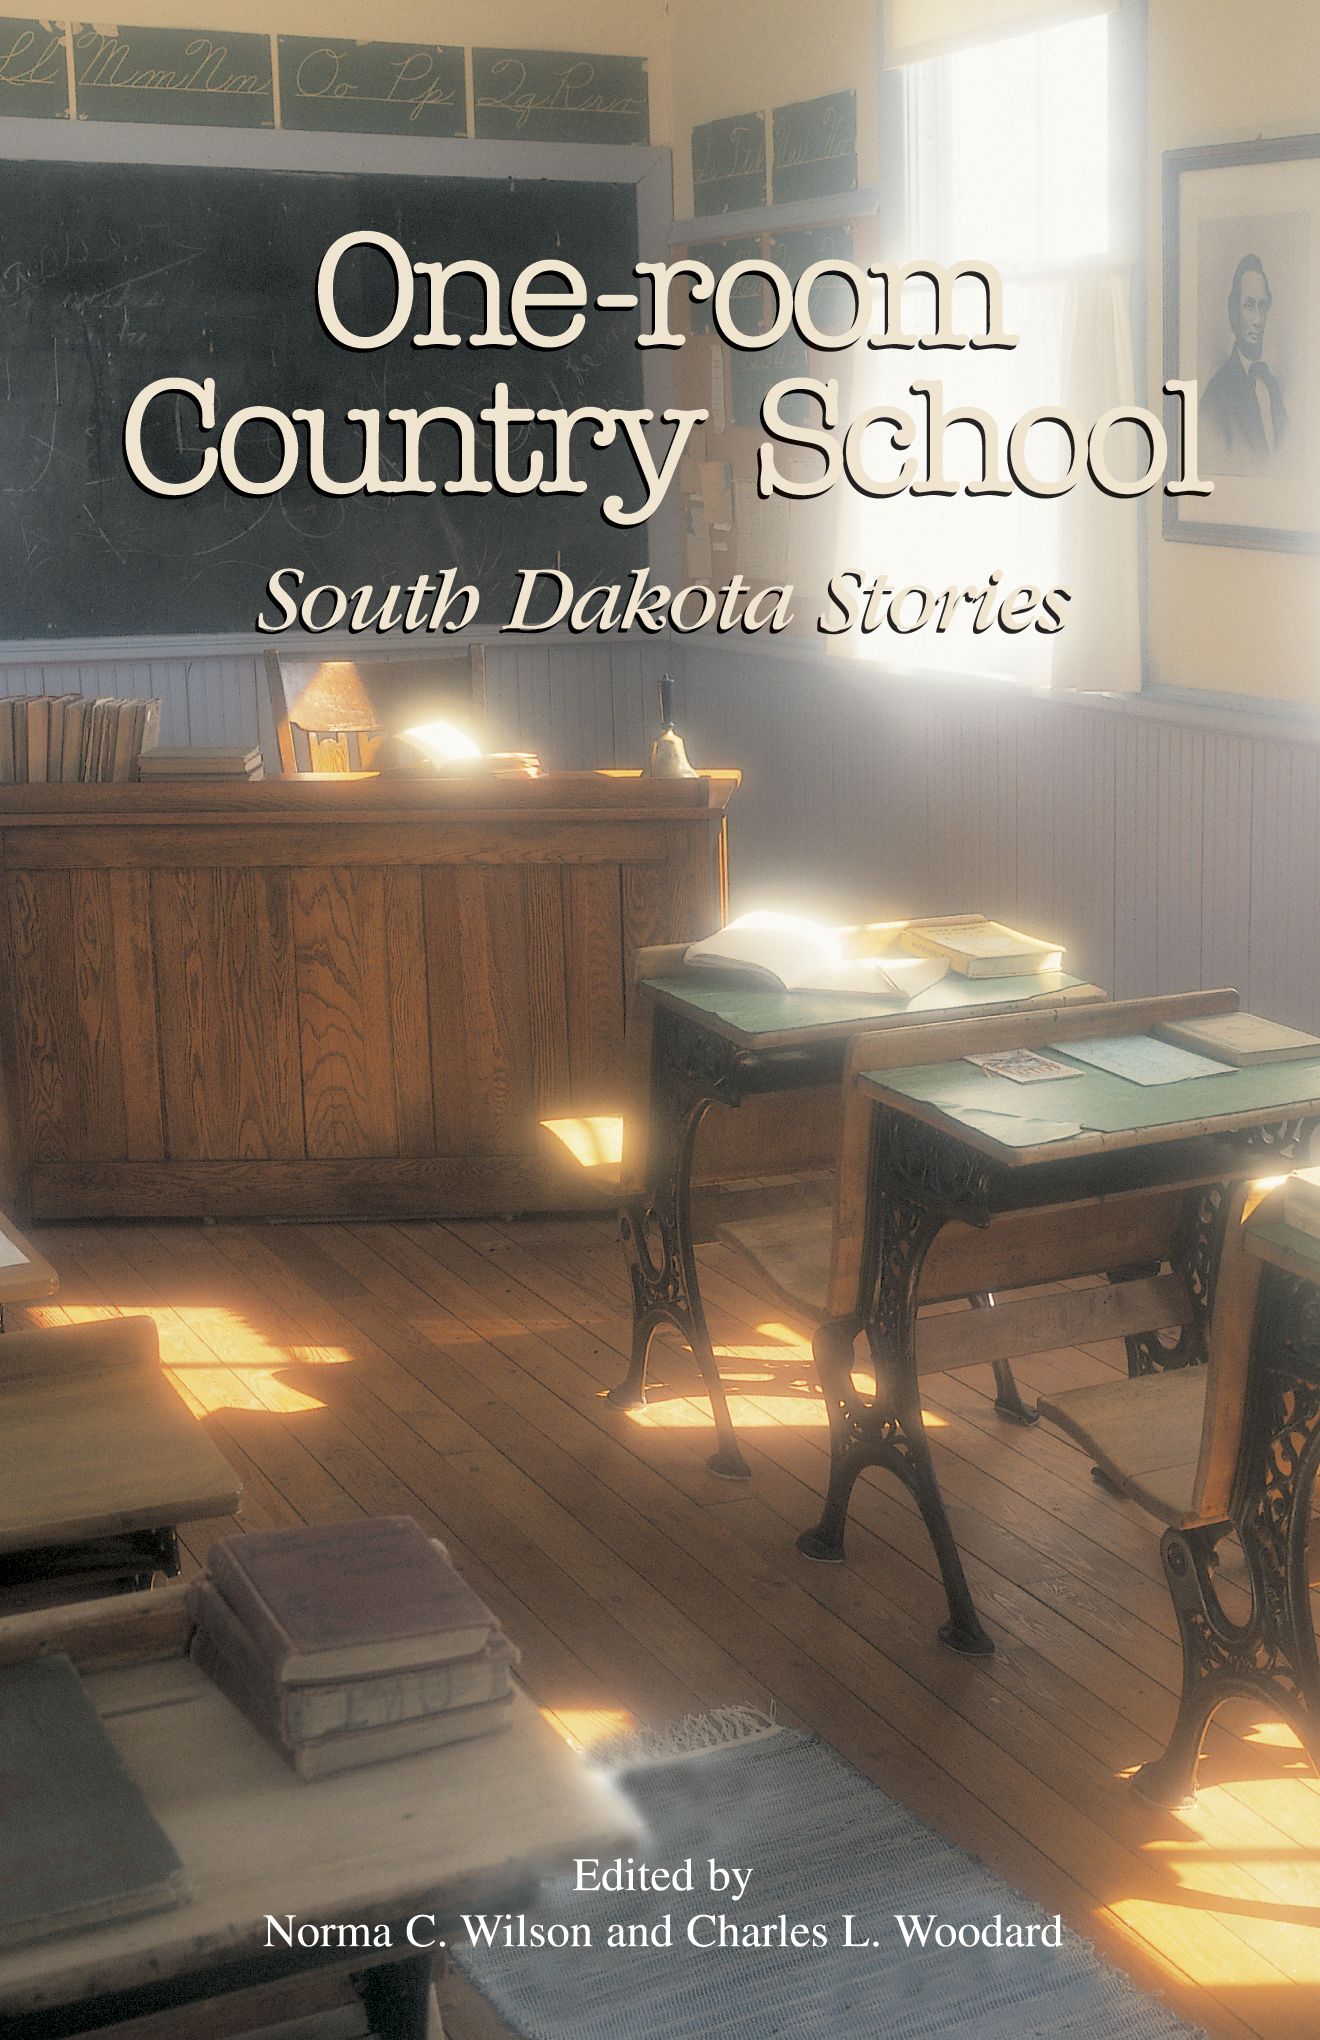 One-room Country School